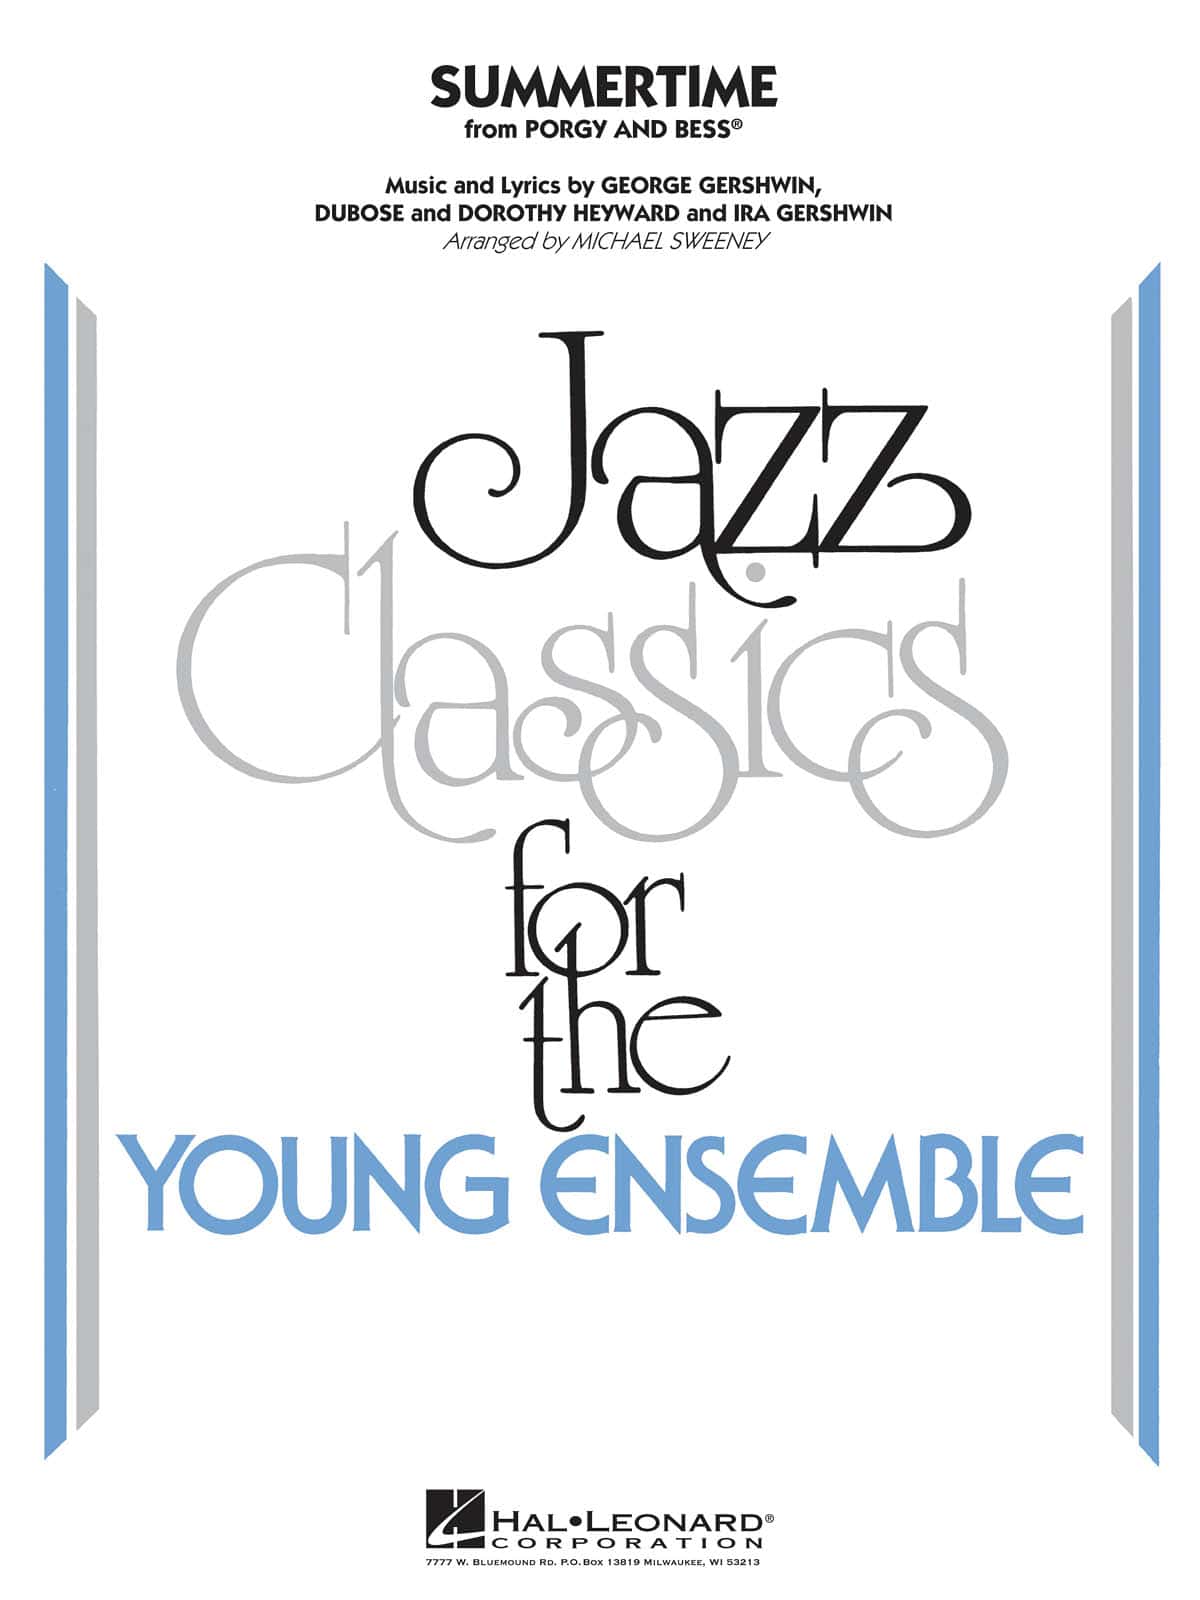 HAL LEONARD SUMMERTIME (ARR. MICHAEL SWEENY) - JAZZ CLASSICS FOR THE YOUNG ENSEMBLE